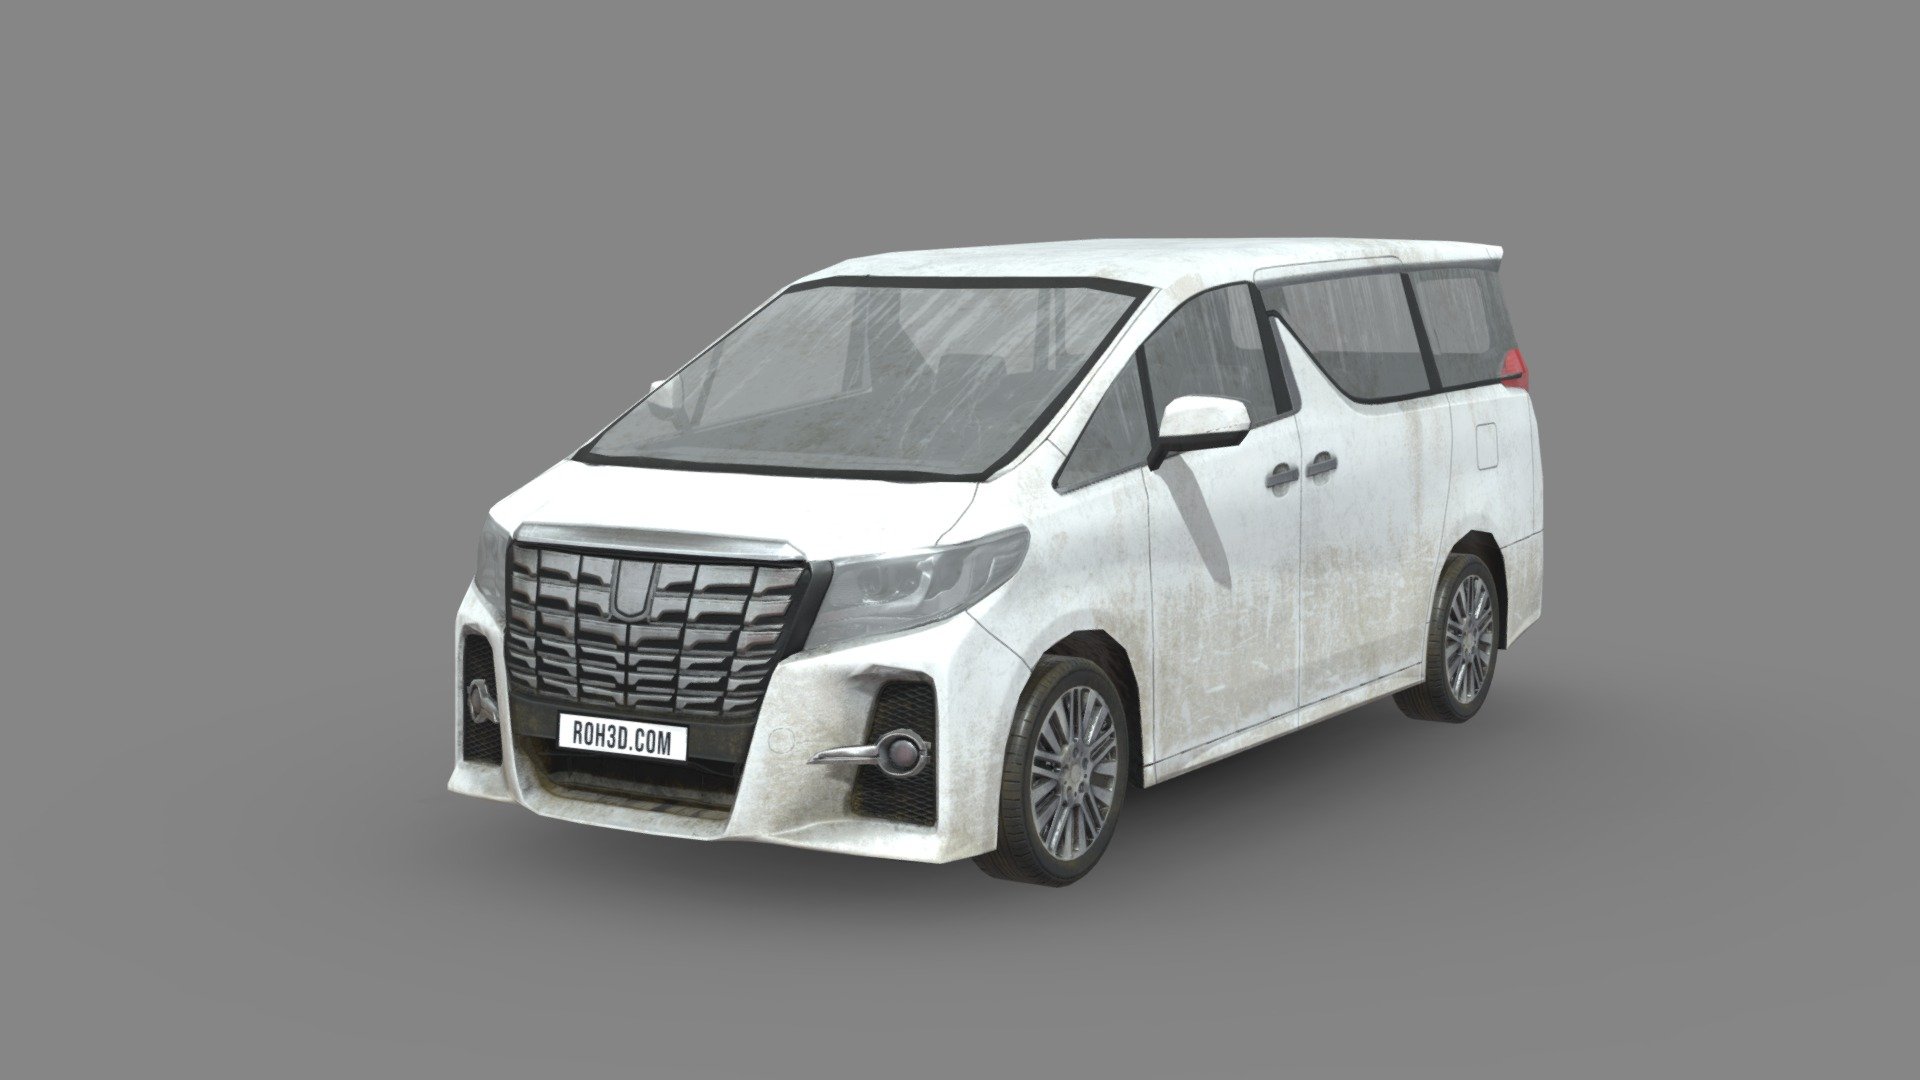 The Toyota Alphard (Japanese: トヨタ・アルファード, Hepburn: Toyota Arufādo) is a minivan produced by the Japanese automaker Toyota since 2002. It is available as a seven- or eight-seater with petrol and hybrid engine options. Hybrid variants have been available since 2003, which incorporates Toyota's Hybrid Synergy Drive technology.

The Alphard is primarily made for the Japanese market, but is also sold in Bangladesh, Belarus, Russia, the Middle East, Greater China, and Southeast Asia. Similar to the Camry, it is often classified as a luxury car in Southeast Asian markets.

The vehicle was named after Alphard, the brightest star in the constellation Hydra. The name &ldquo;Vellfire